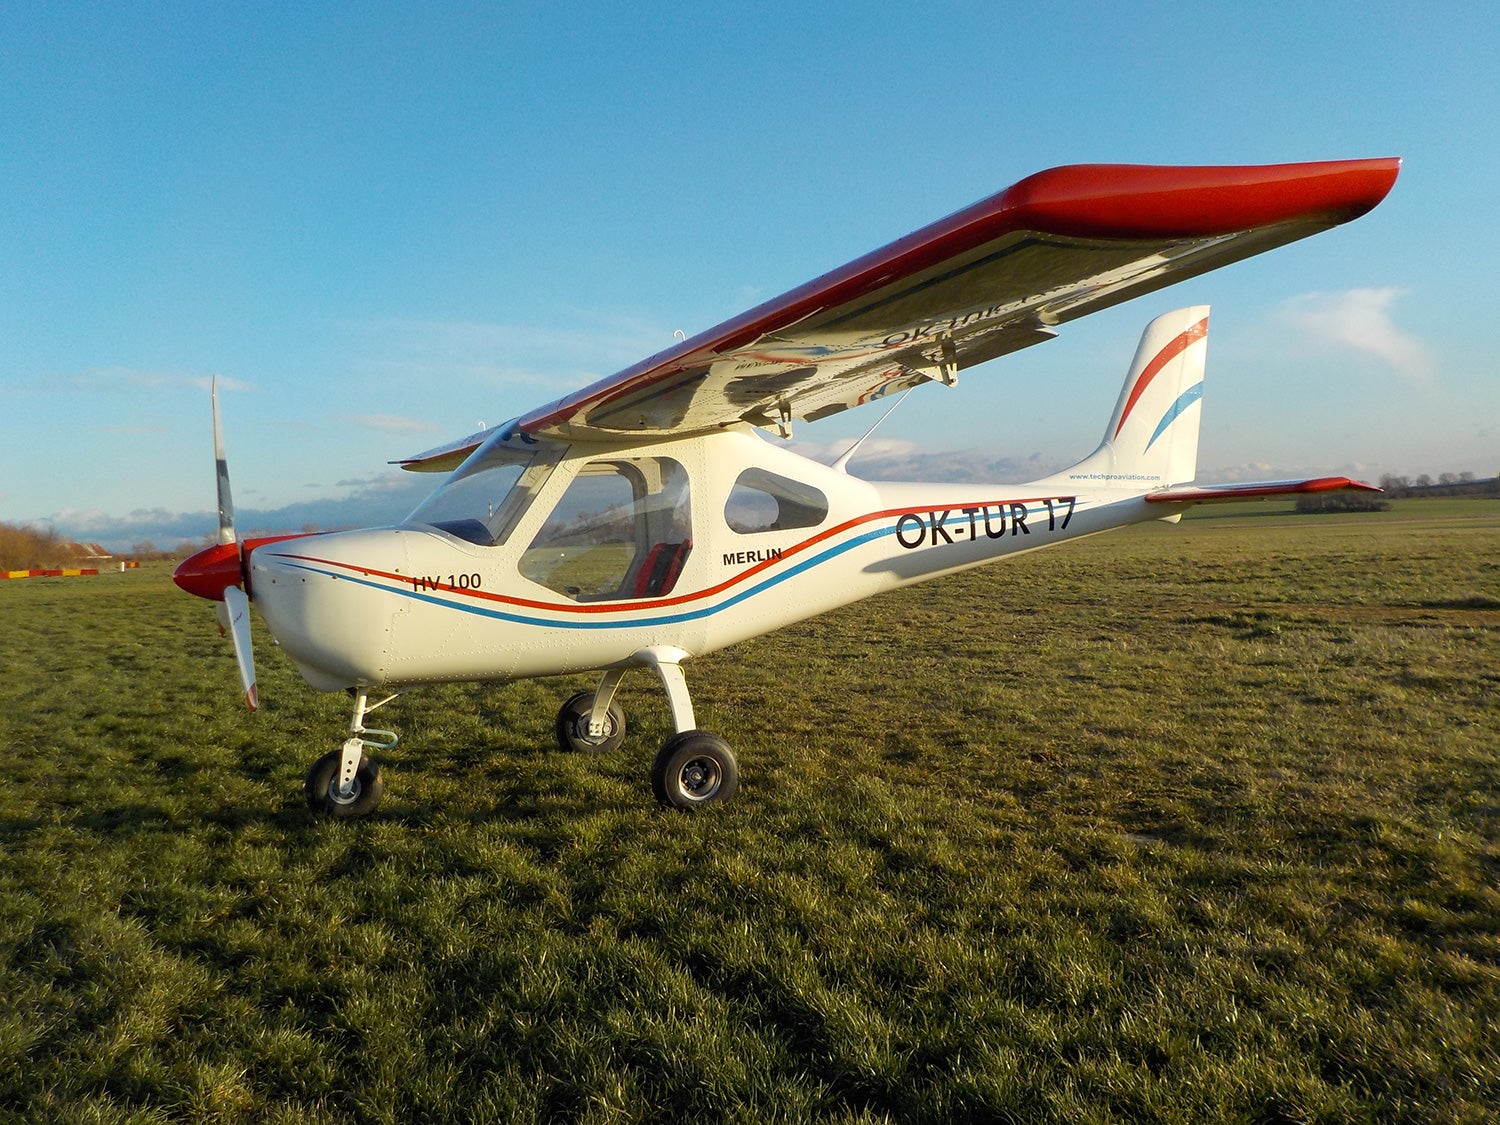 While the most common configuration is with tricycle gear, the airplane can be set up with tailwheel or amphibious gear.